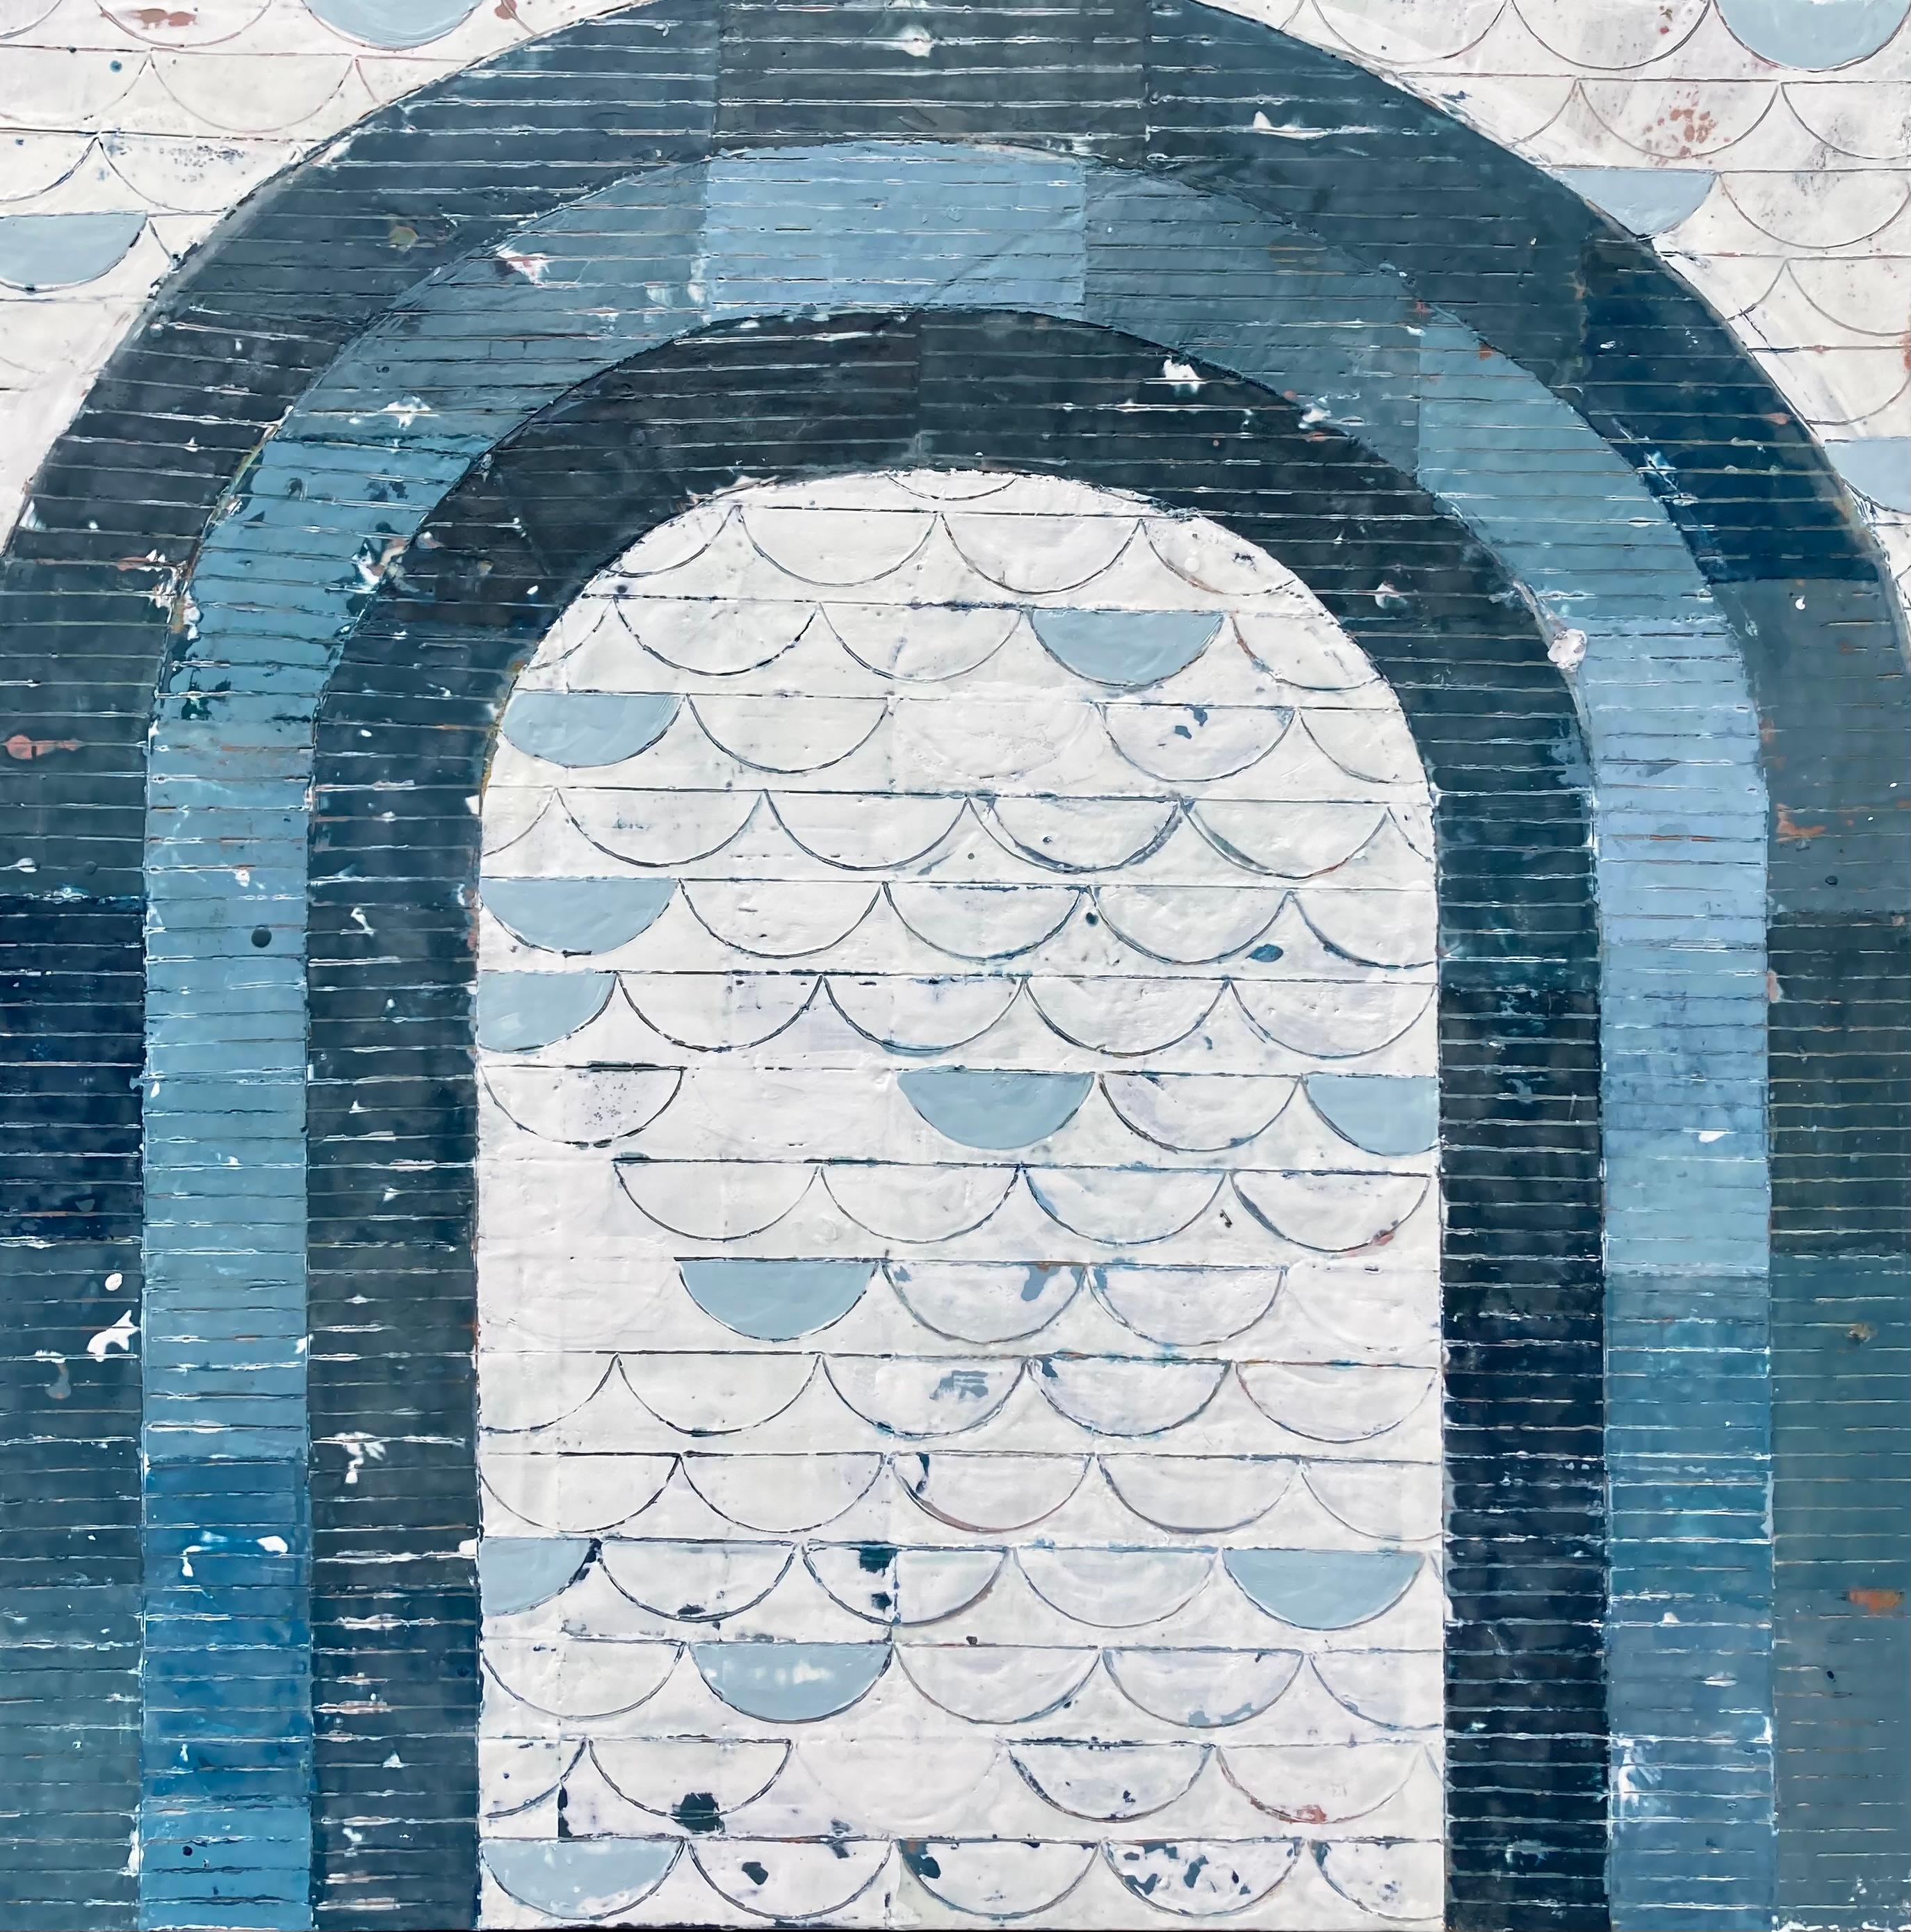 Marissa Voytenko Abstract Painting - "On the Other Side" Blue and white abstract arch with half circle accents.